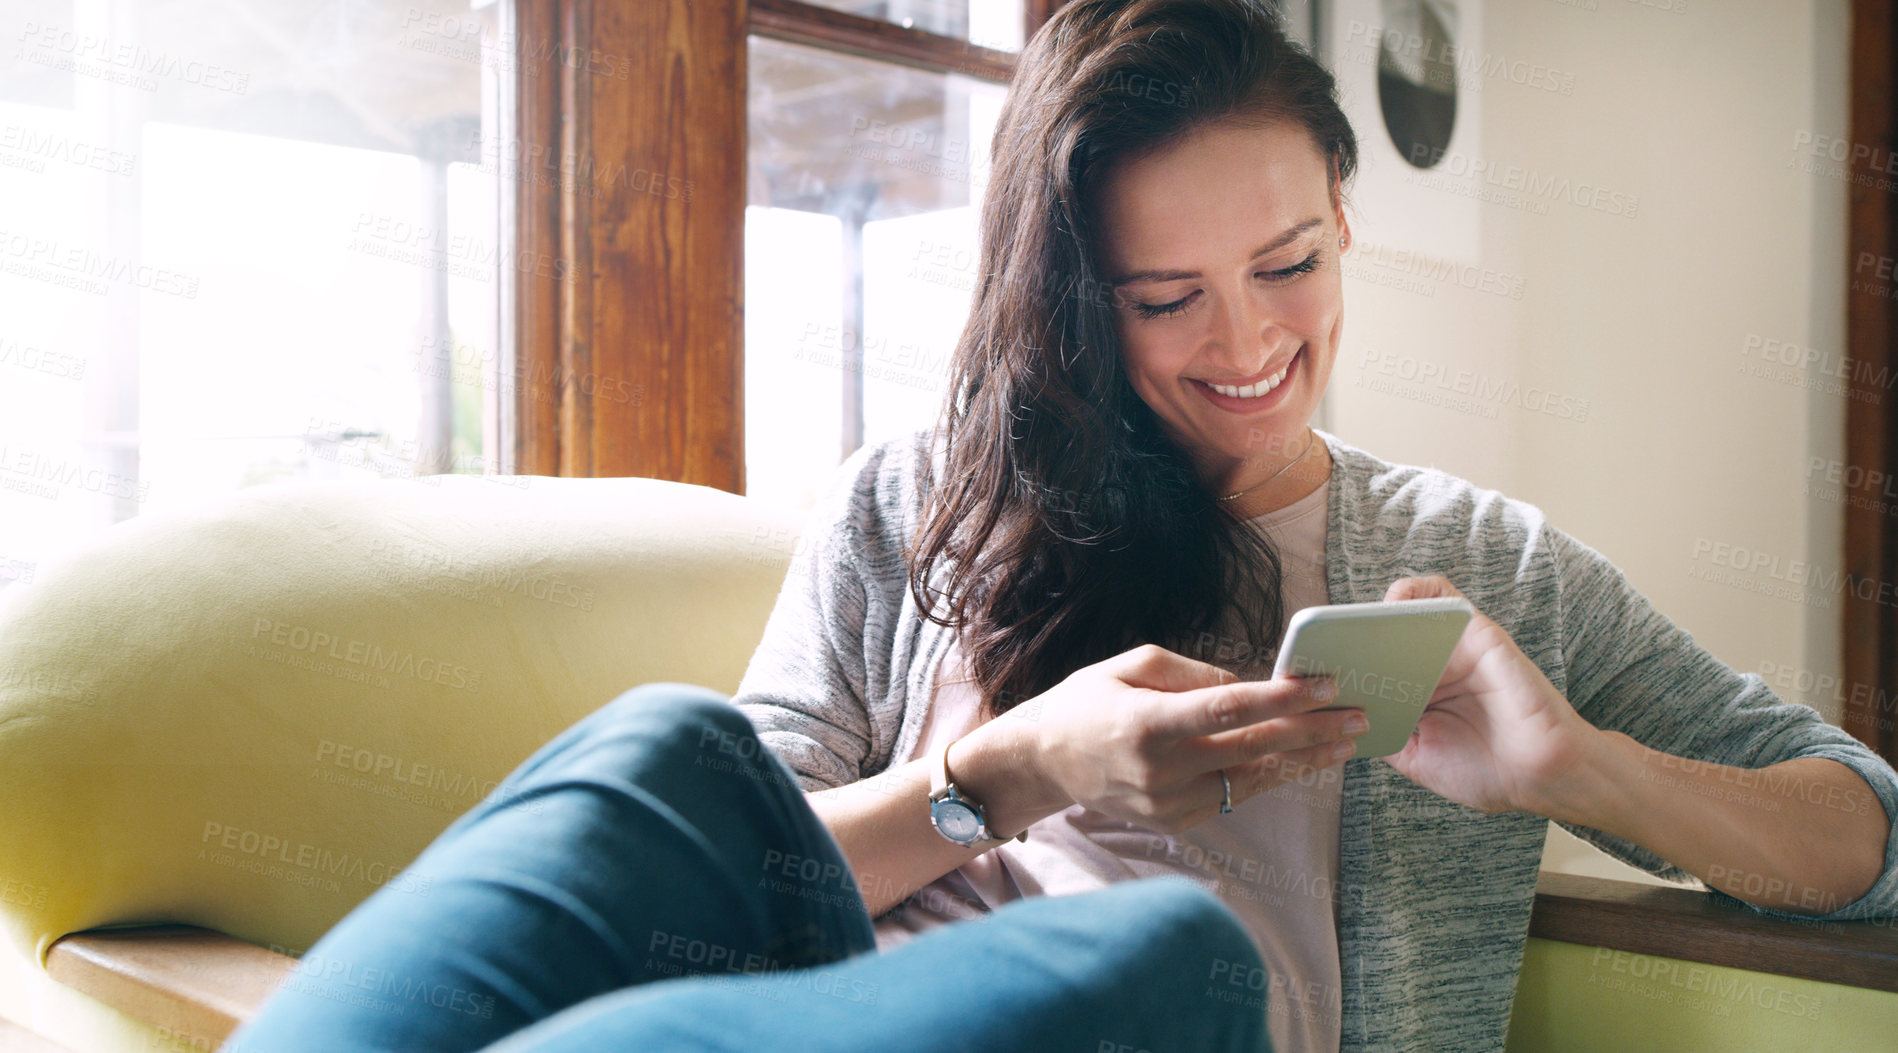 Buy stock photo Cropped shot of an attractive young woman smiling while using a smartphone on her couch at home